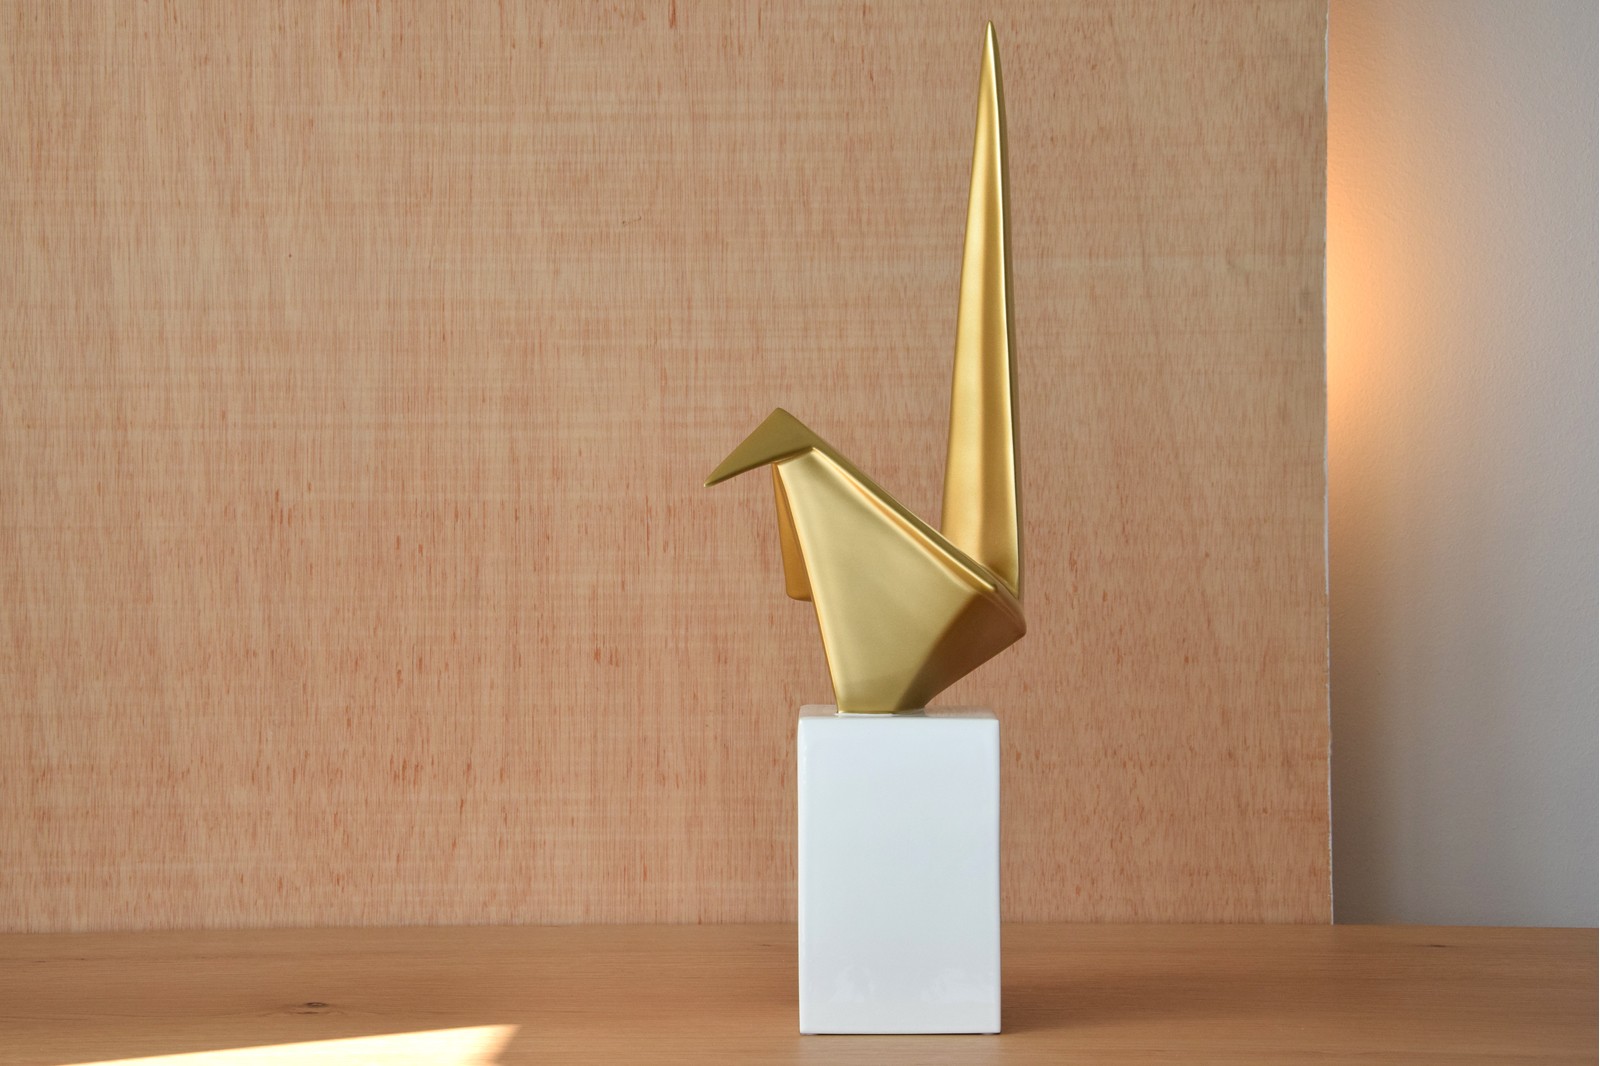 ORIGAMI BIRD COLLECTION. CERAMIC SCULPTURE WHITE GOLD GLOSSY